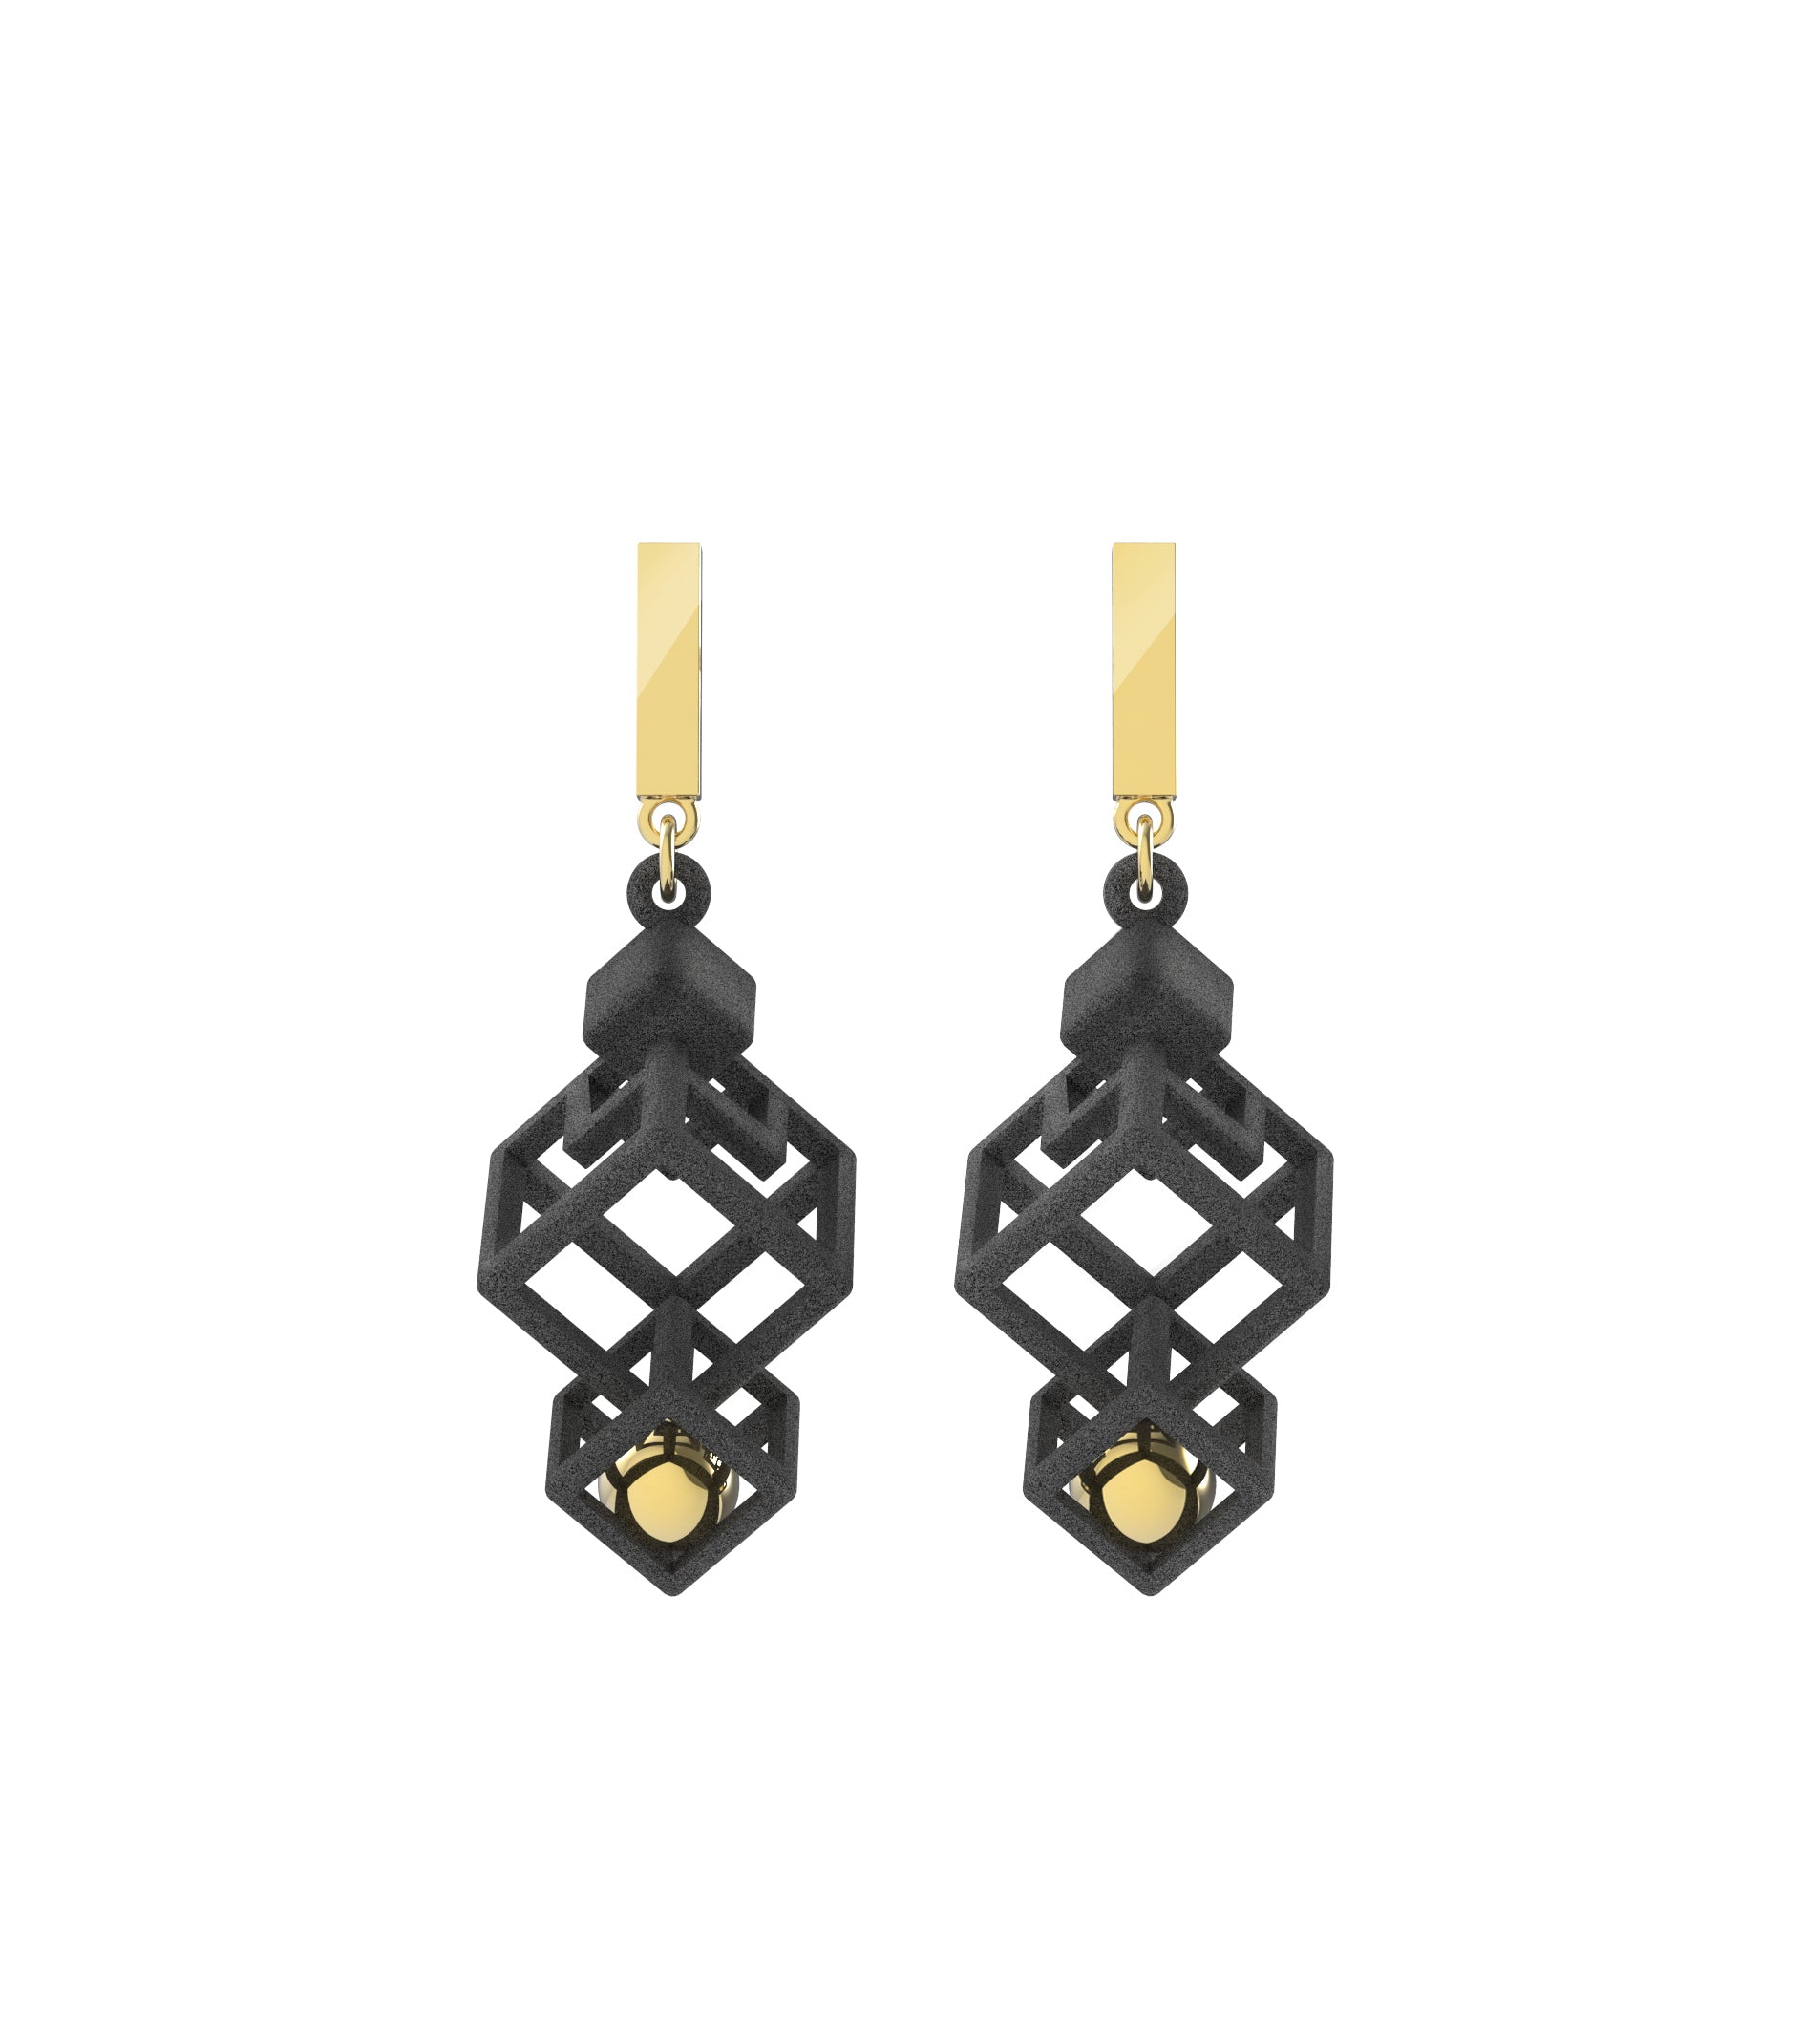 Infinity Art Series - Movable ball in boxes earrings